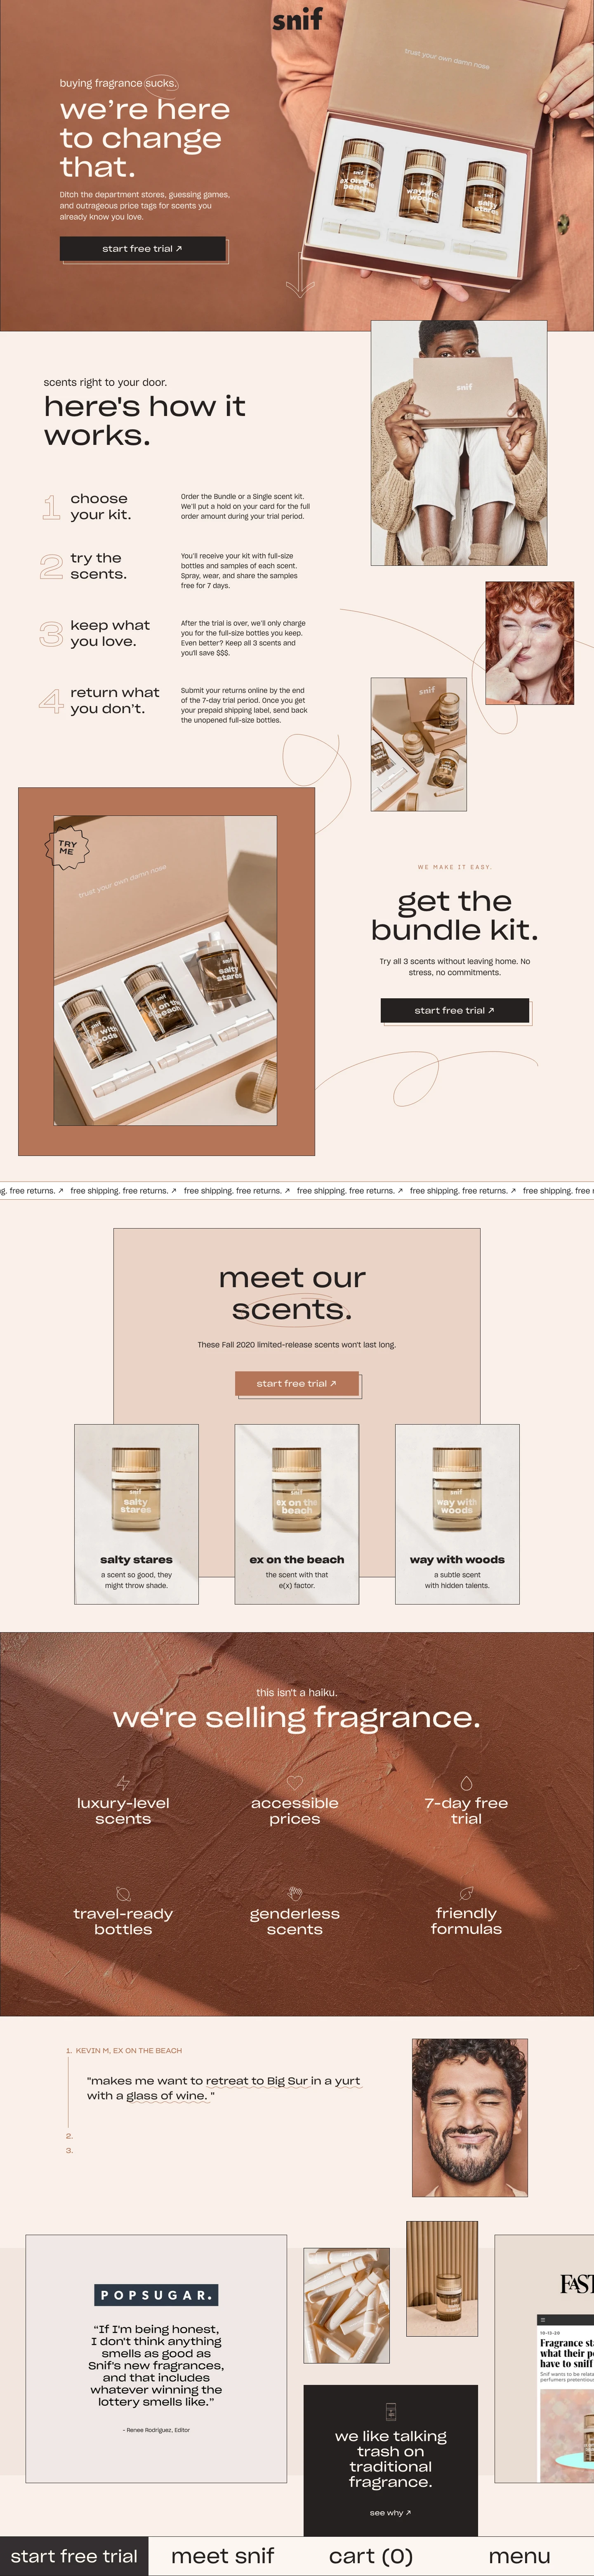 snif Landing Page Example: Buying fragrance sucks. We’re here to change that. Ditch the department stores, guessing games, and outrageous price tags for scents you already know you love.